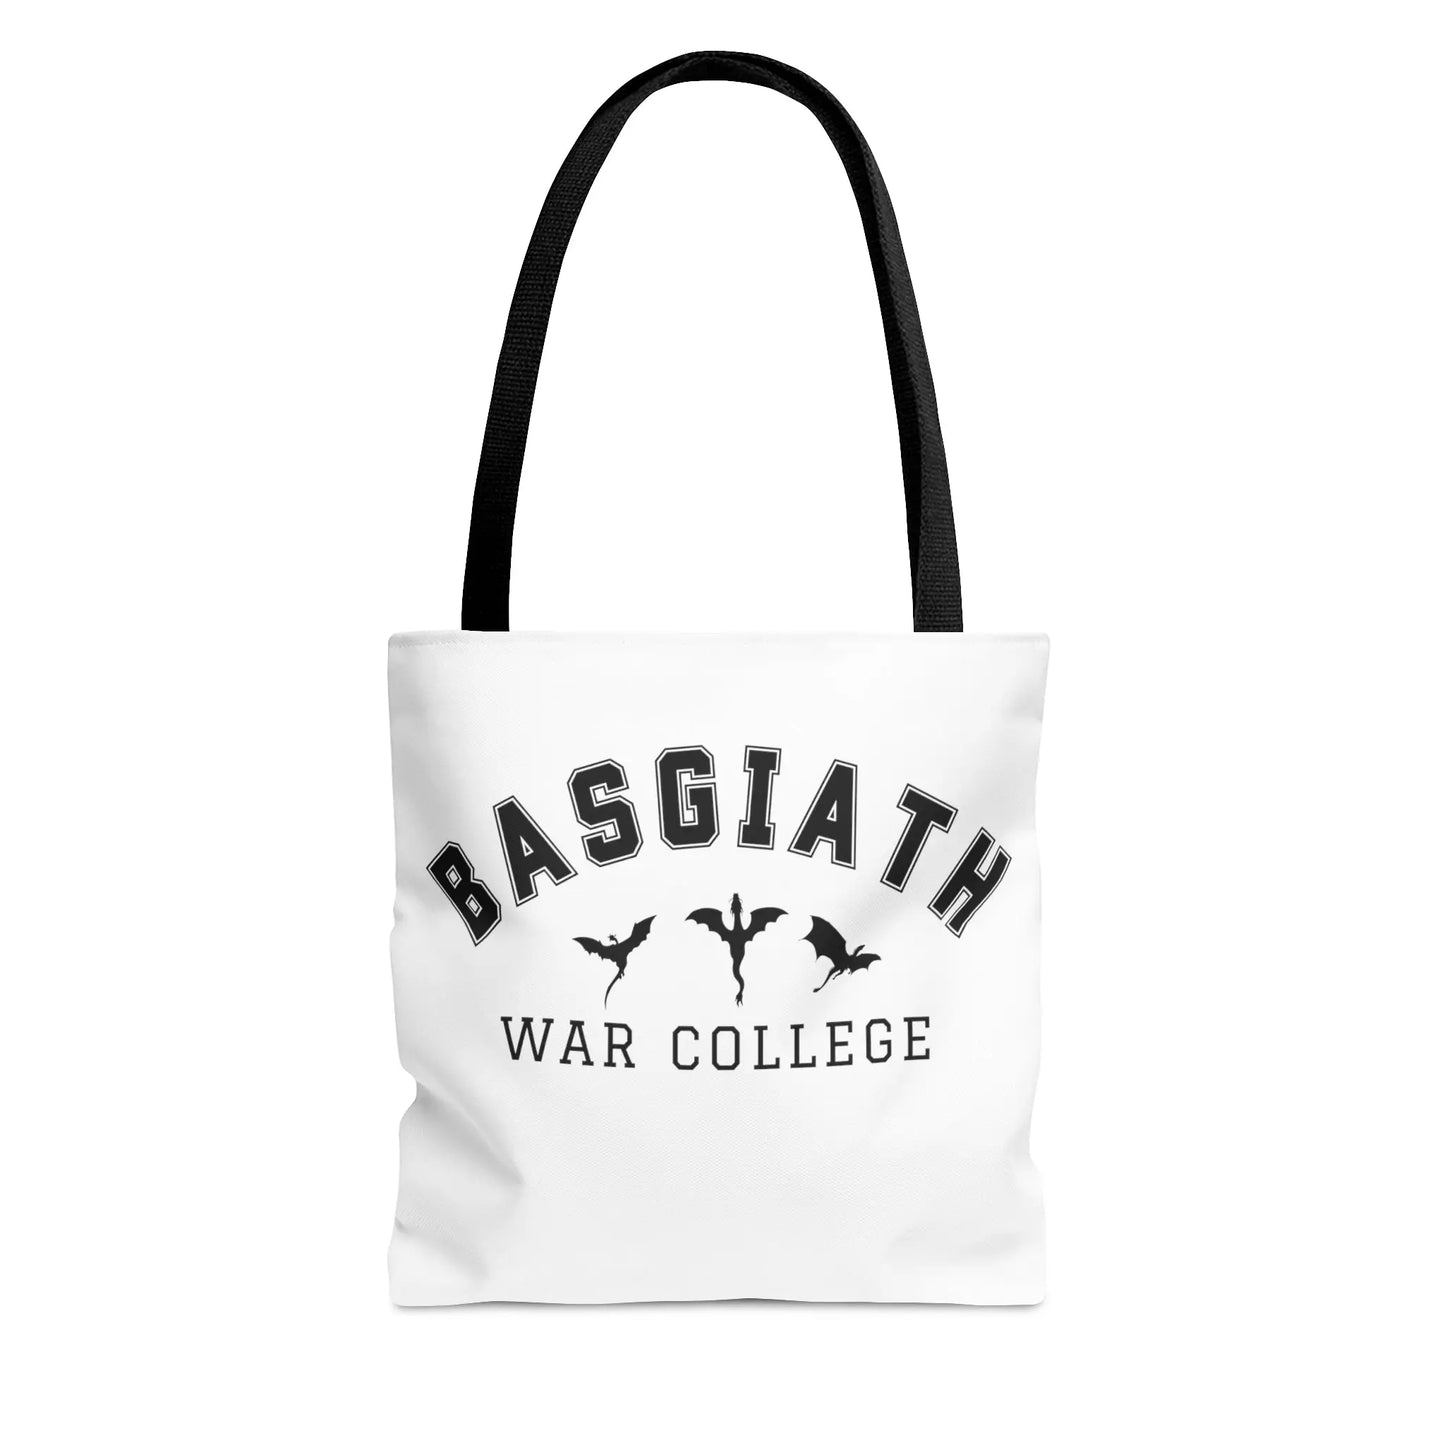 Fourth Wing and Iron Flame by Rebecca Yarros Basgiath War College Tote Bag - Stay Tomorrow Needs You